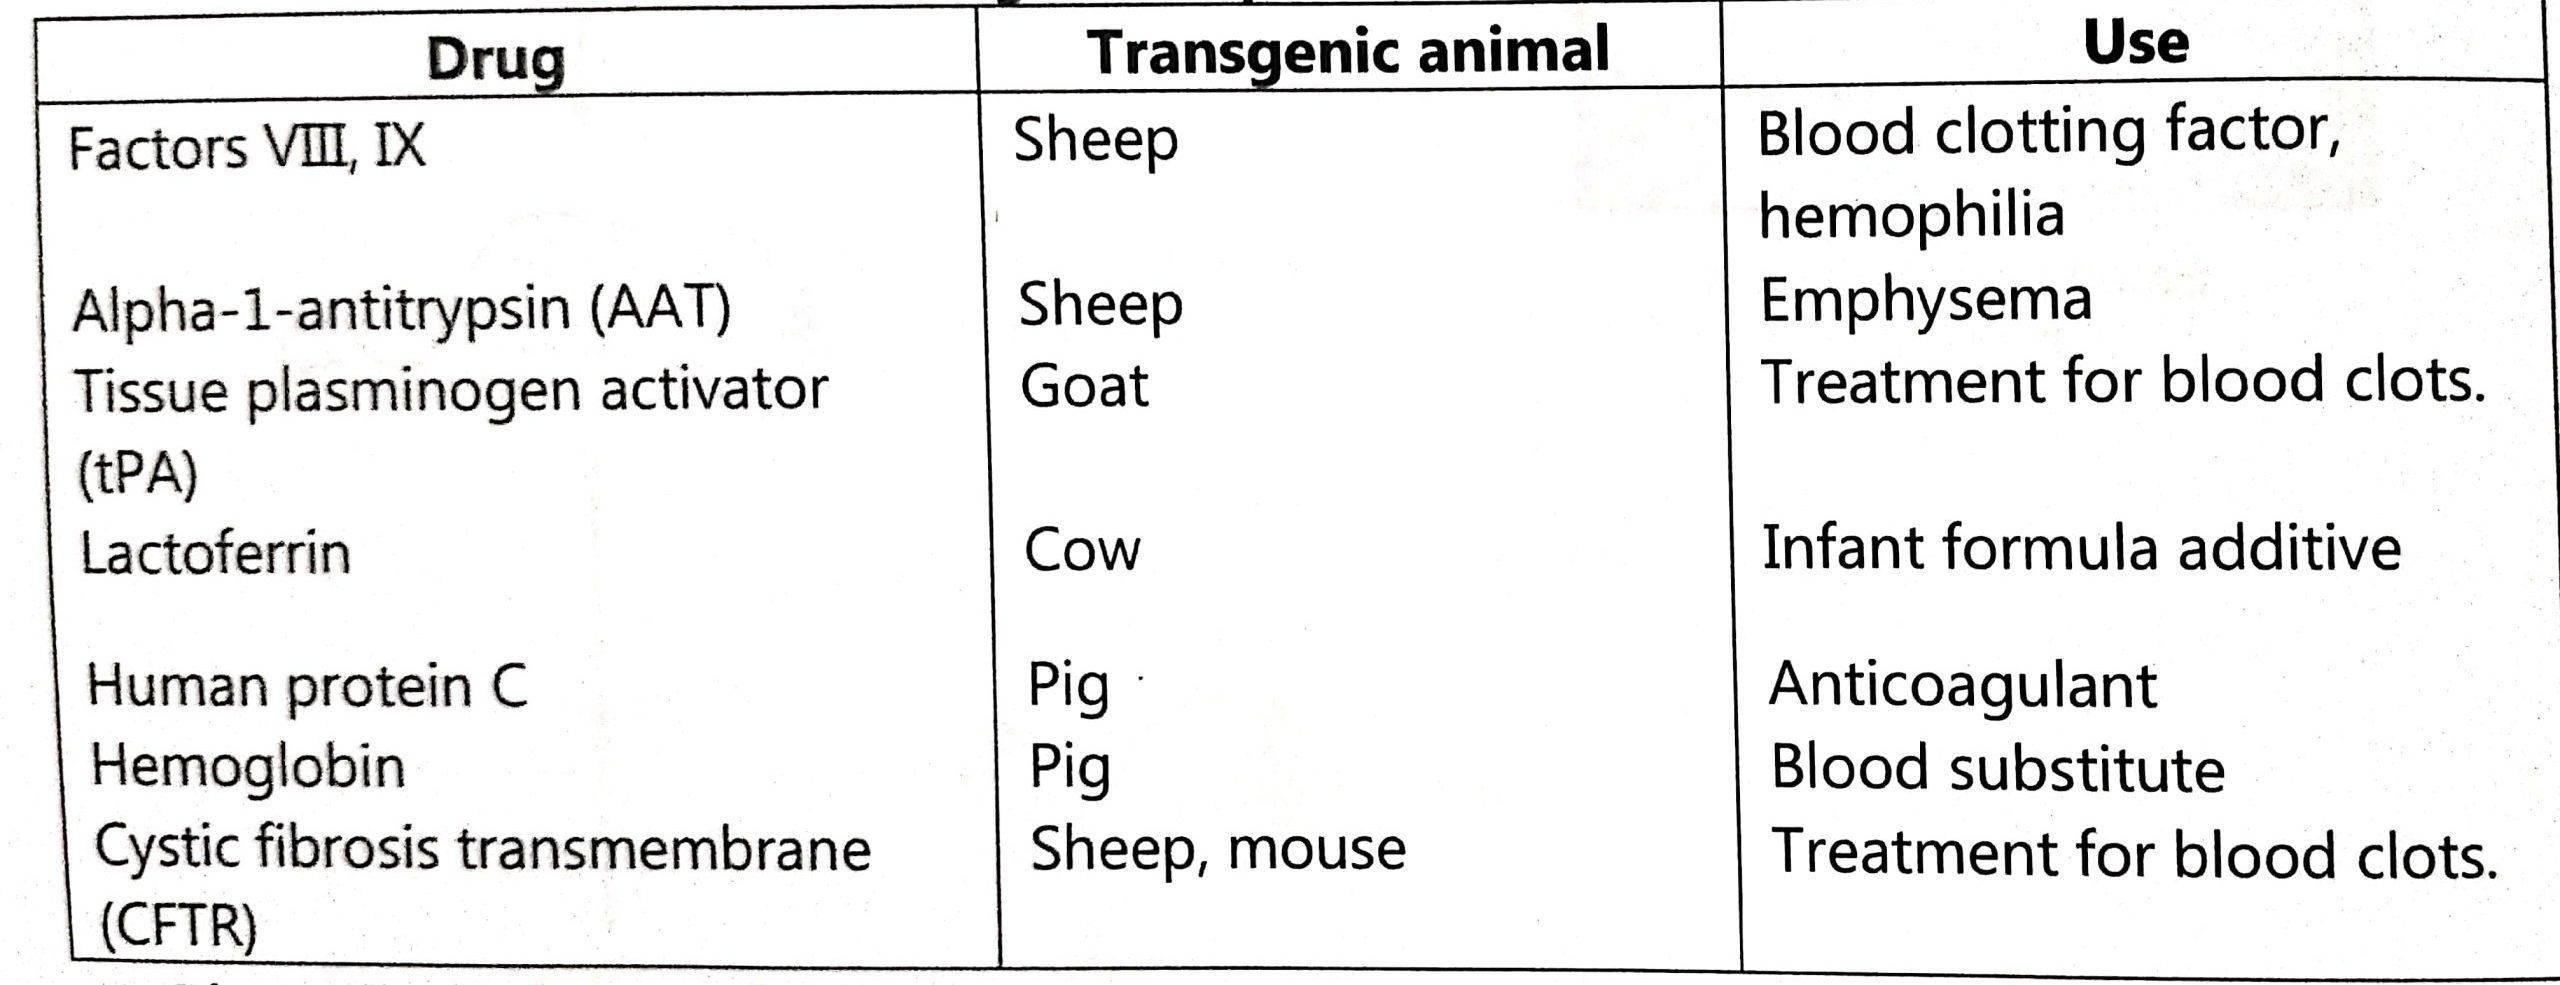 Applications of transgenic animals - BIOLOGY EASE